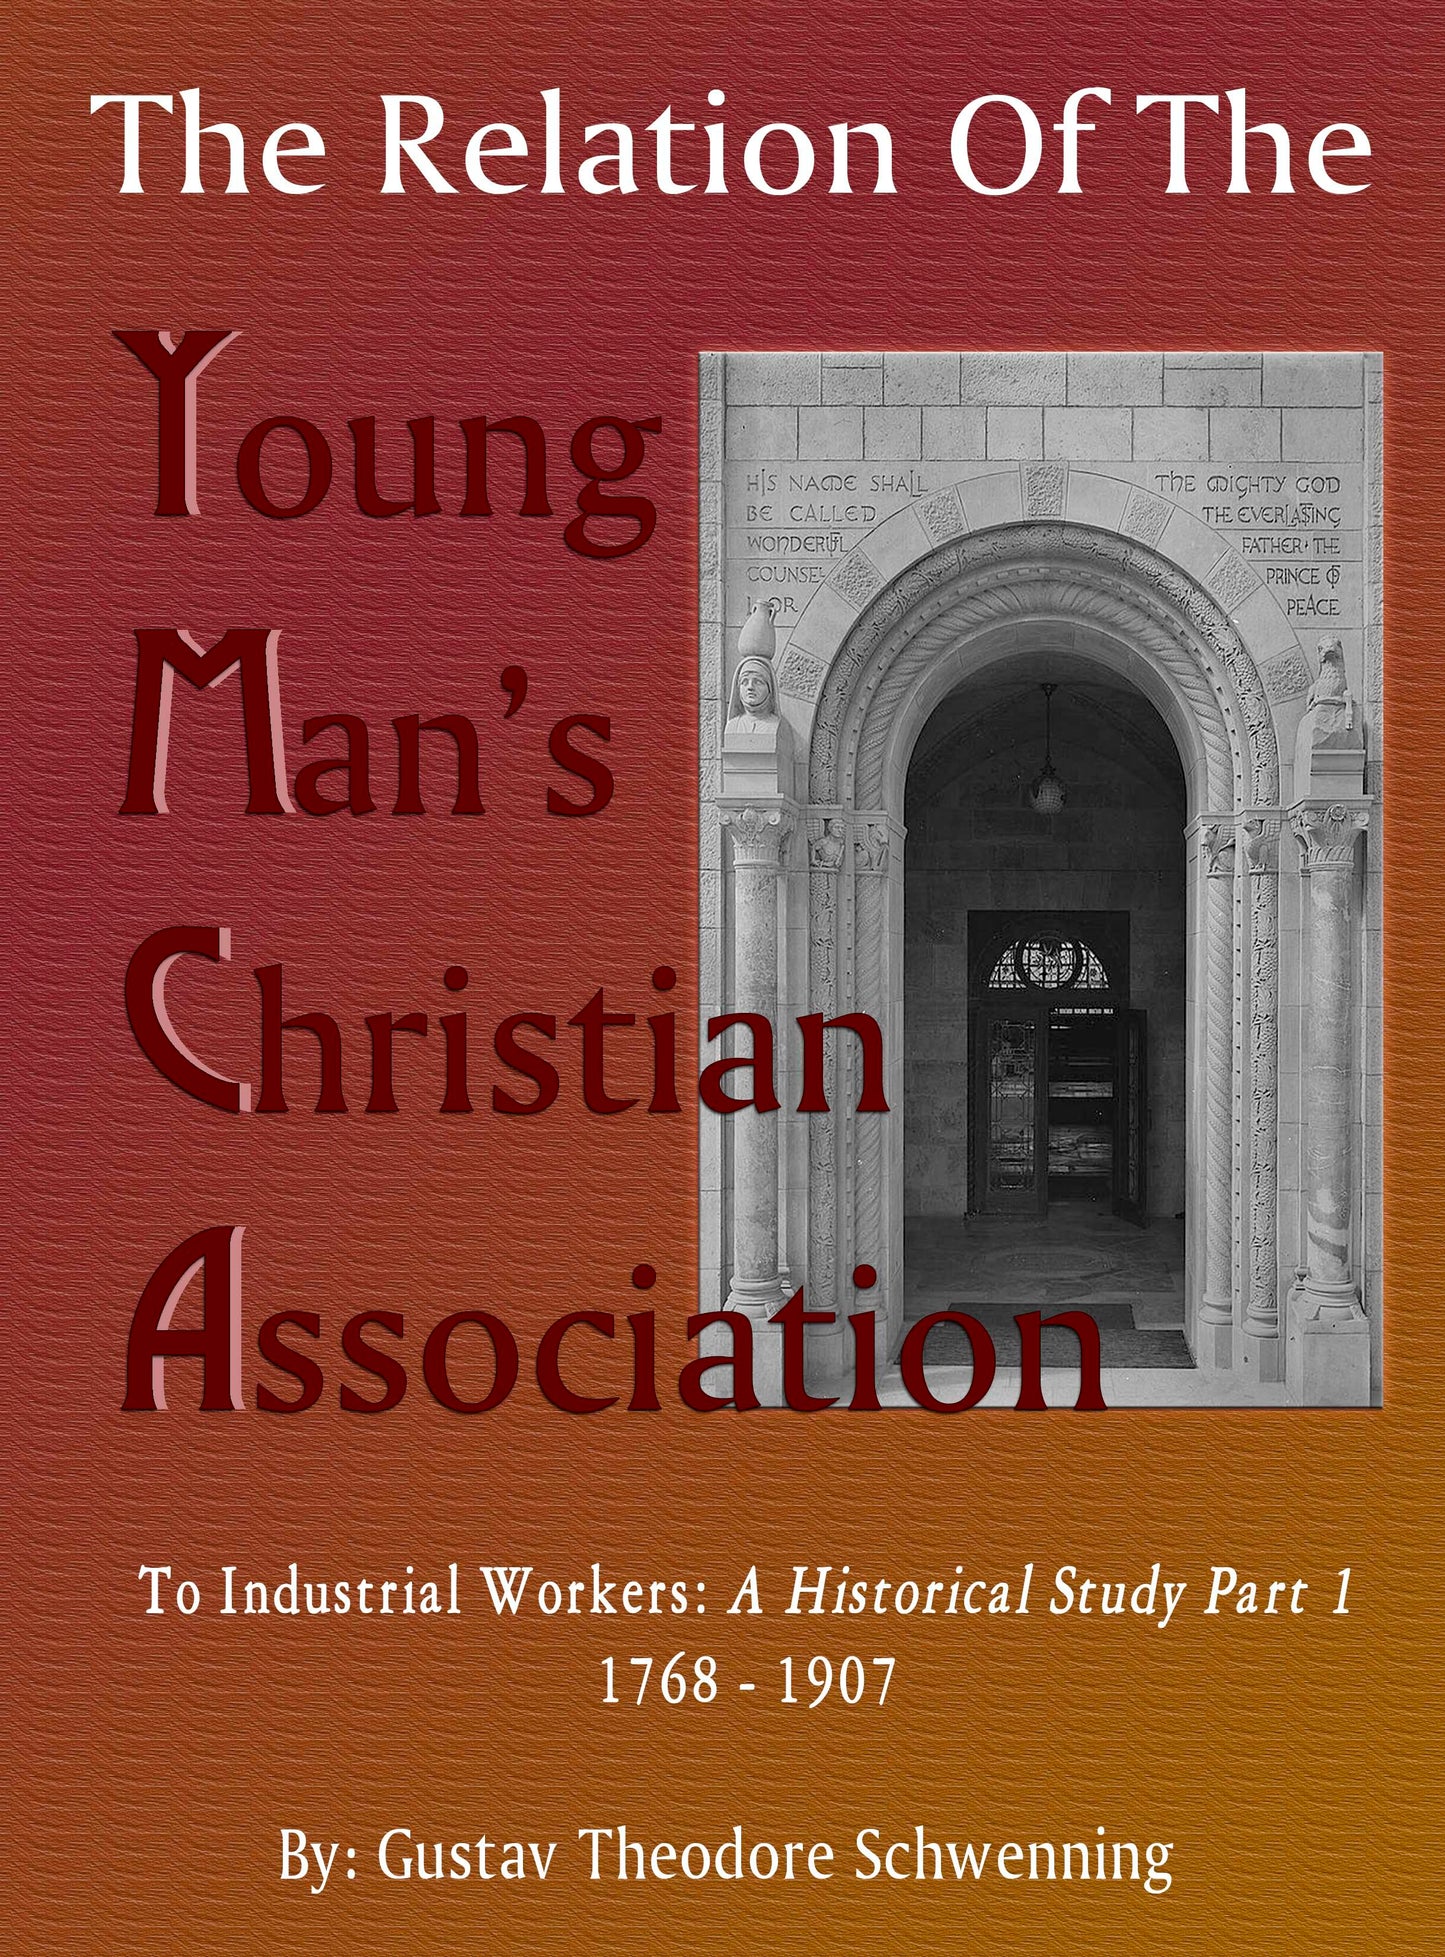 The Relation of the Young Man's Christian Association to Industrial Workers